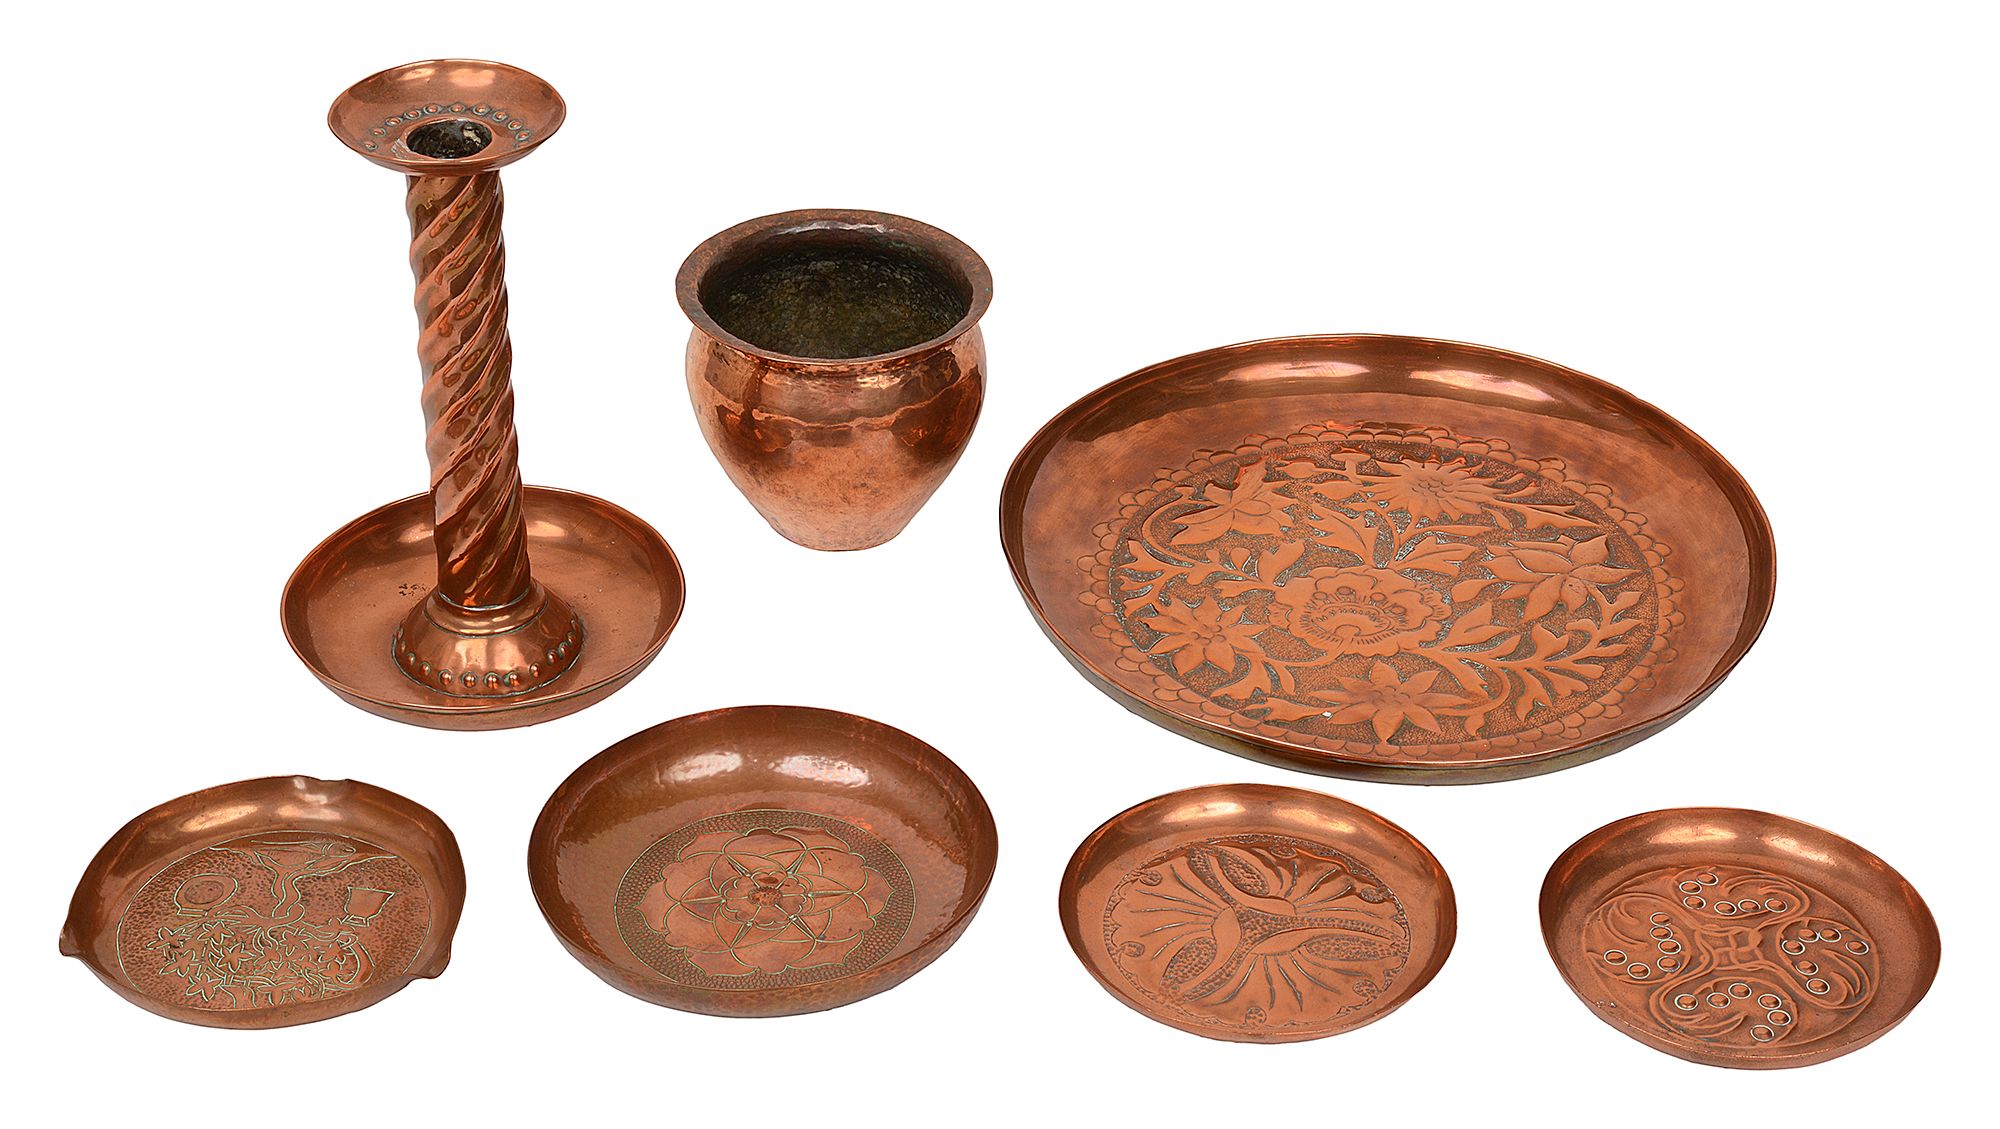 Arts & Crafts hammered copper dishes, a candlestick and a cache pot